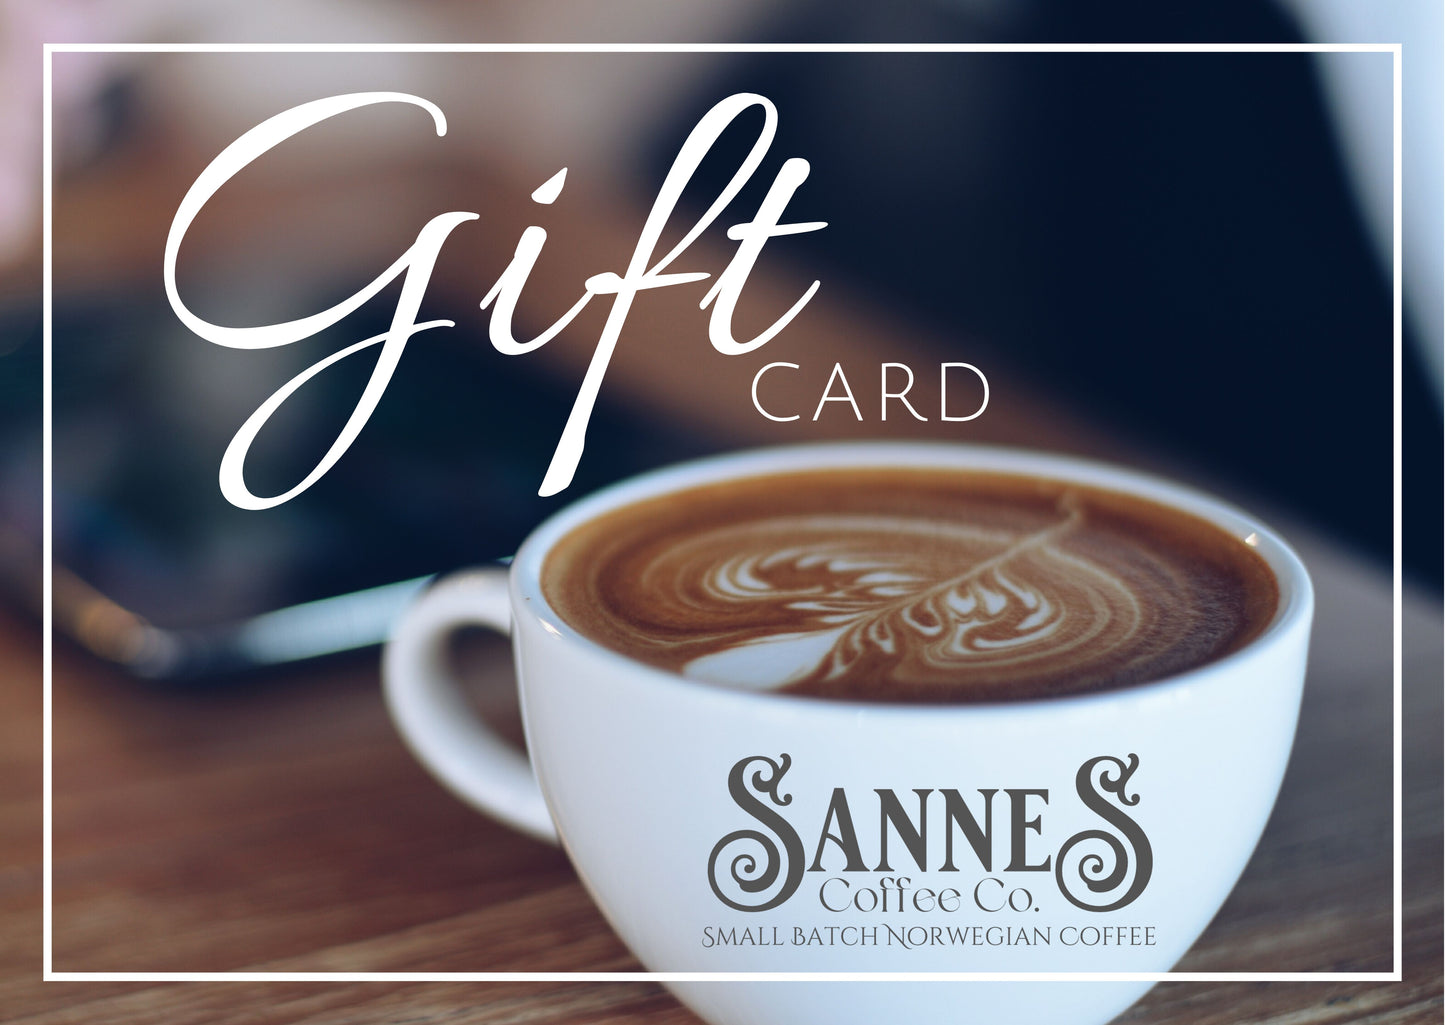 Ultimate coffee Lovers gift card.